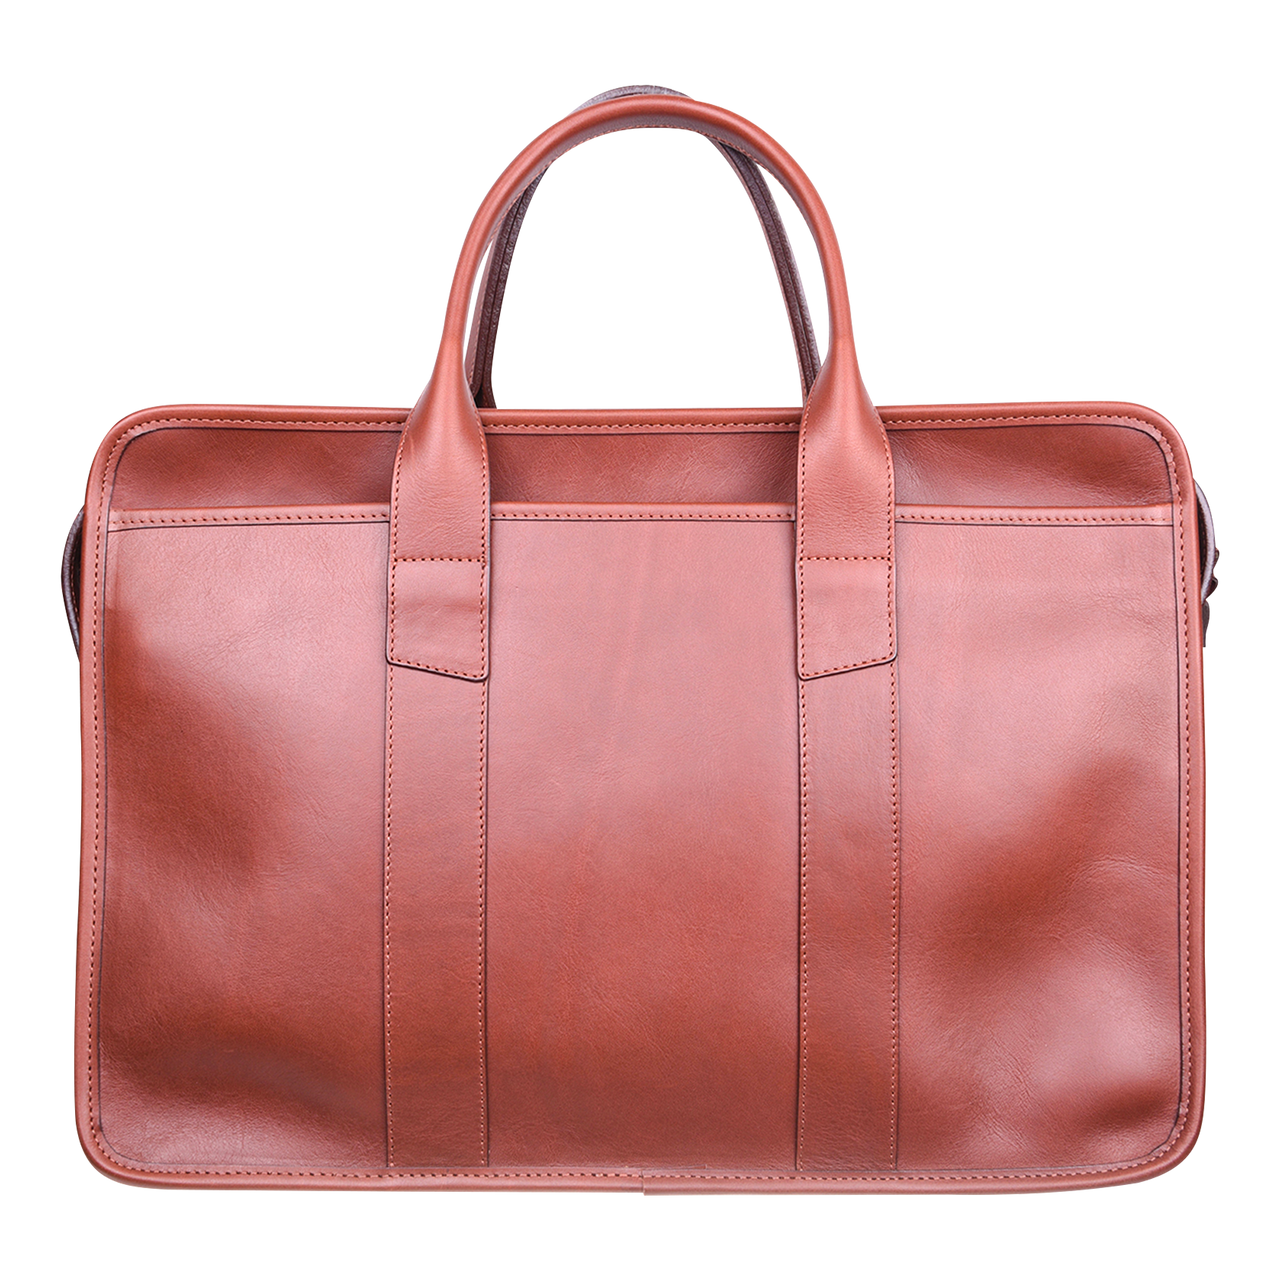 Frank Clegg x WJ & Co. Bound Edge Zip-Top Briefcase in Chestnut Tumbled Leather